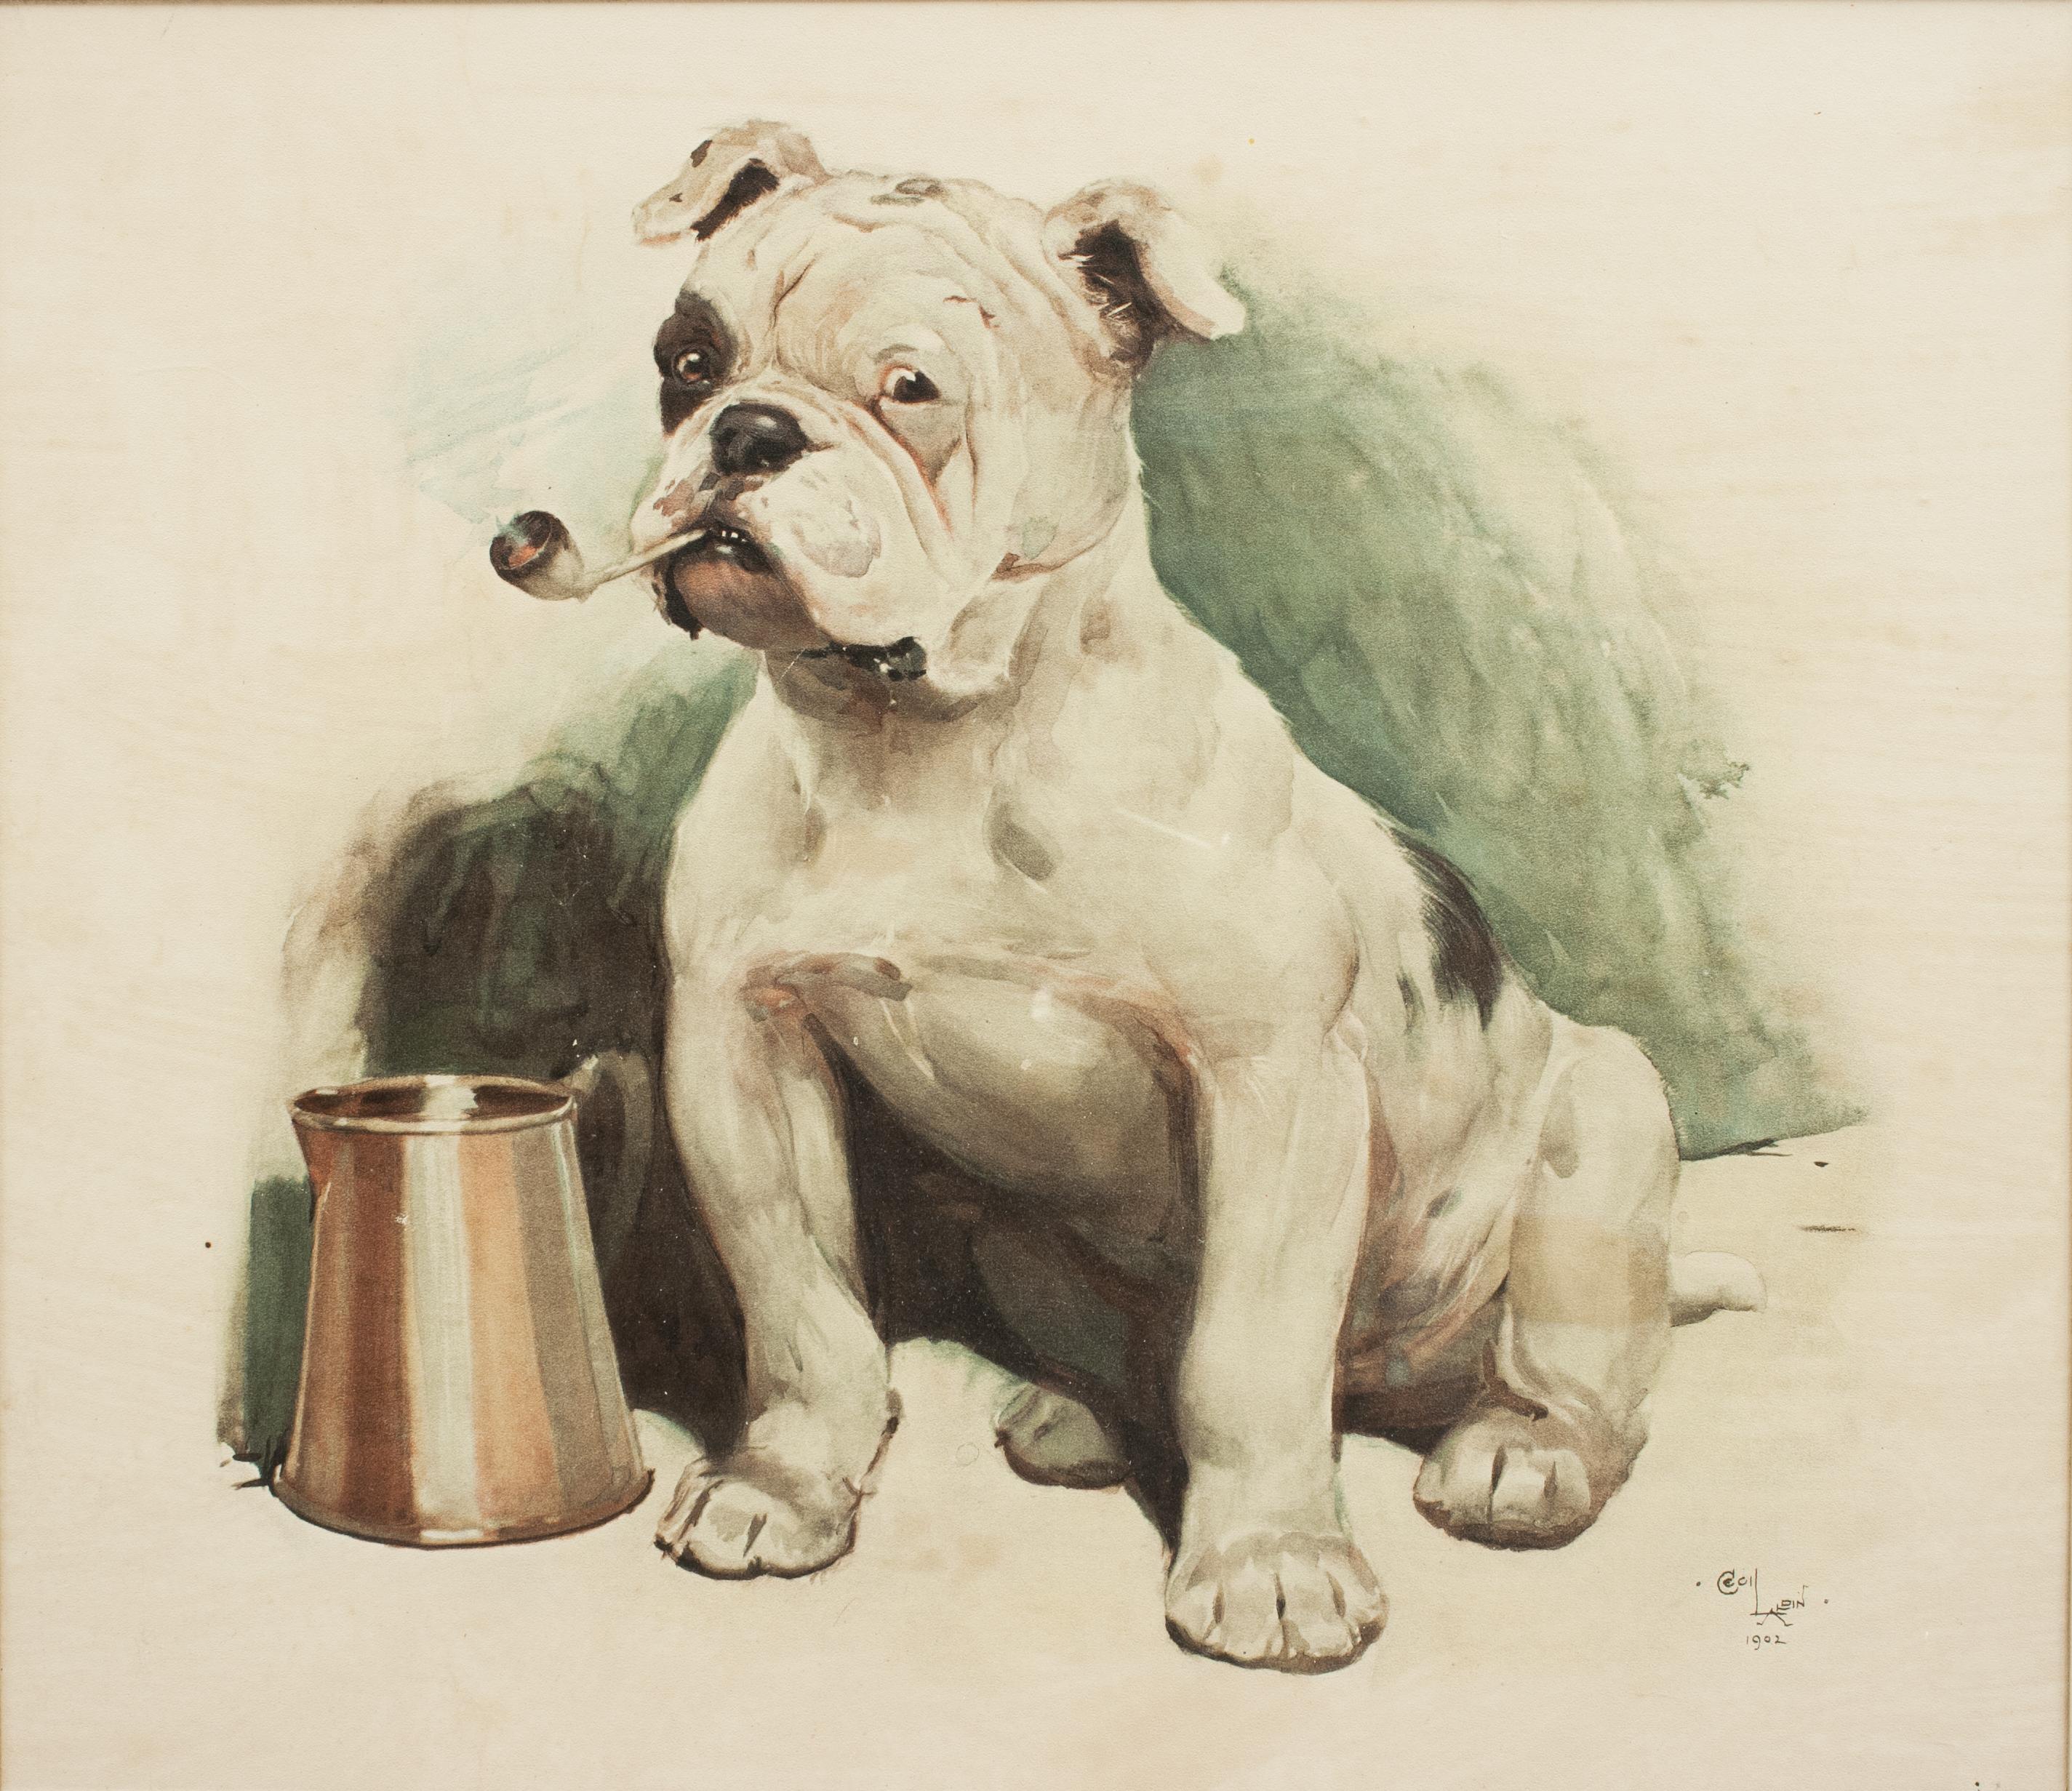 Cecil Aldin Dog Print, That's Bully.
A classic piece of Aldin's canine work, 'That's Bully'. A color lithograph with title and framed in period oak frame. 'Bully' Aldin's English bulldog can be seen standing in bold disobedience smoking a pipe next